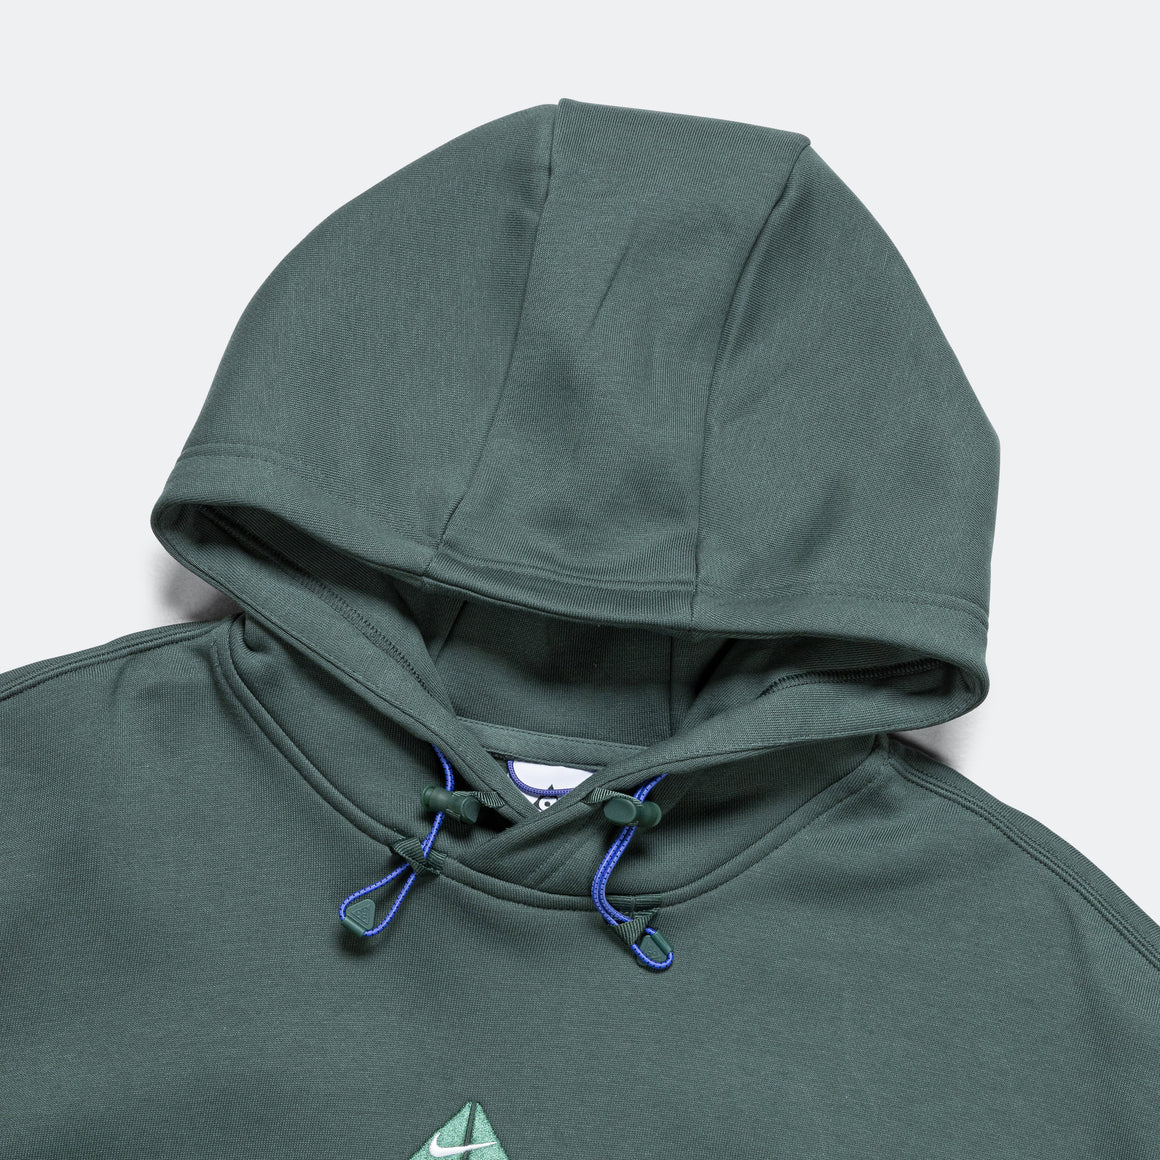 Nike ACG - 'Lungs' Therma-FIT Tuff Fleece Hoodie - Bicoastal/Summit White - UP THERE